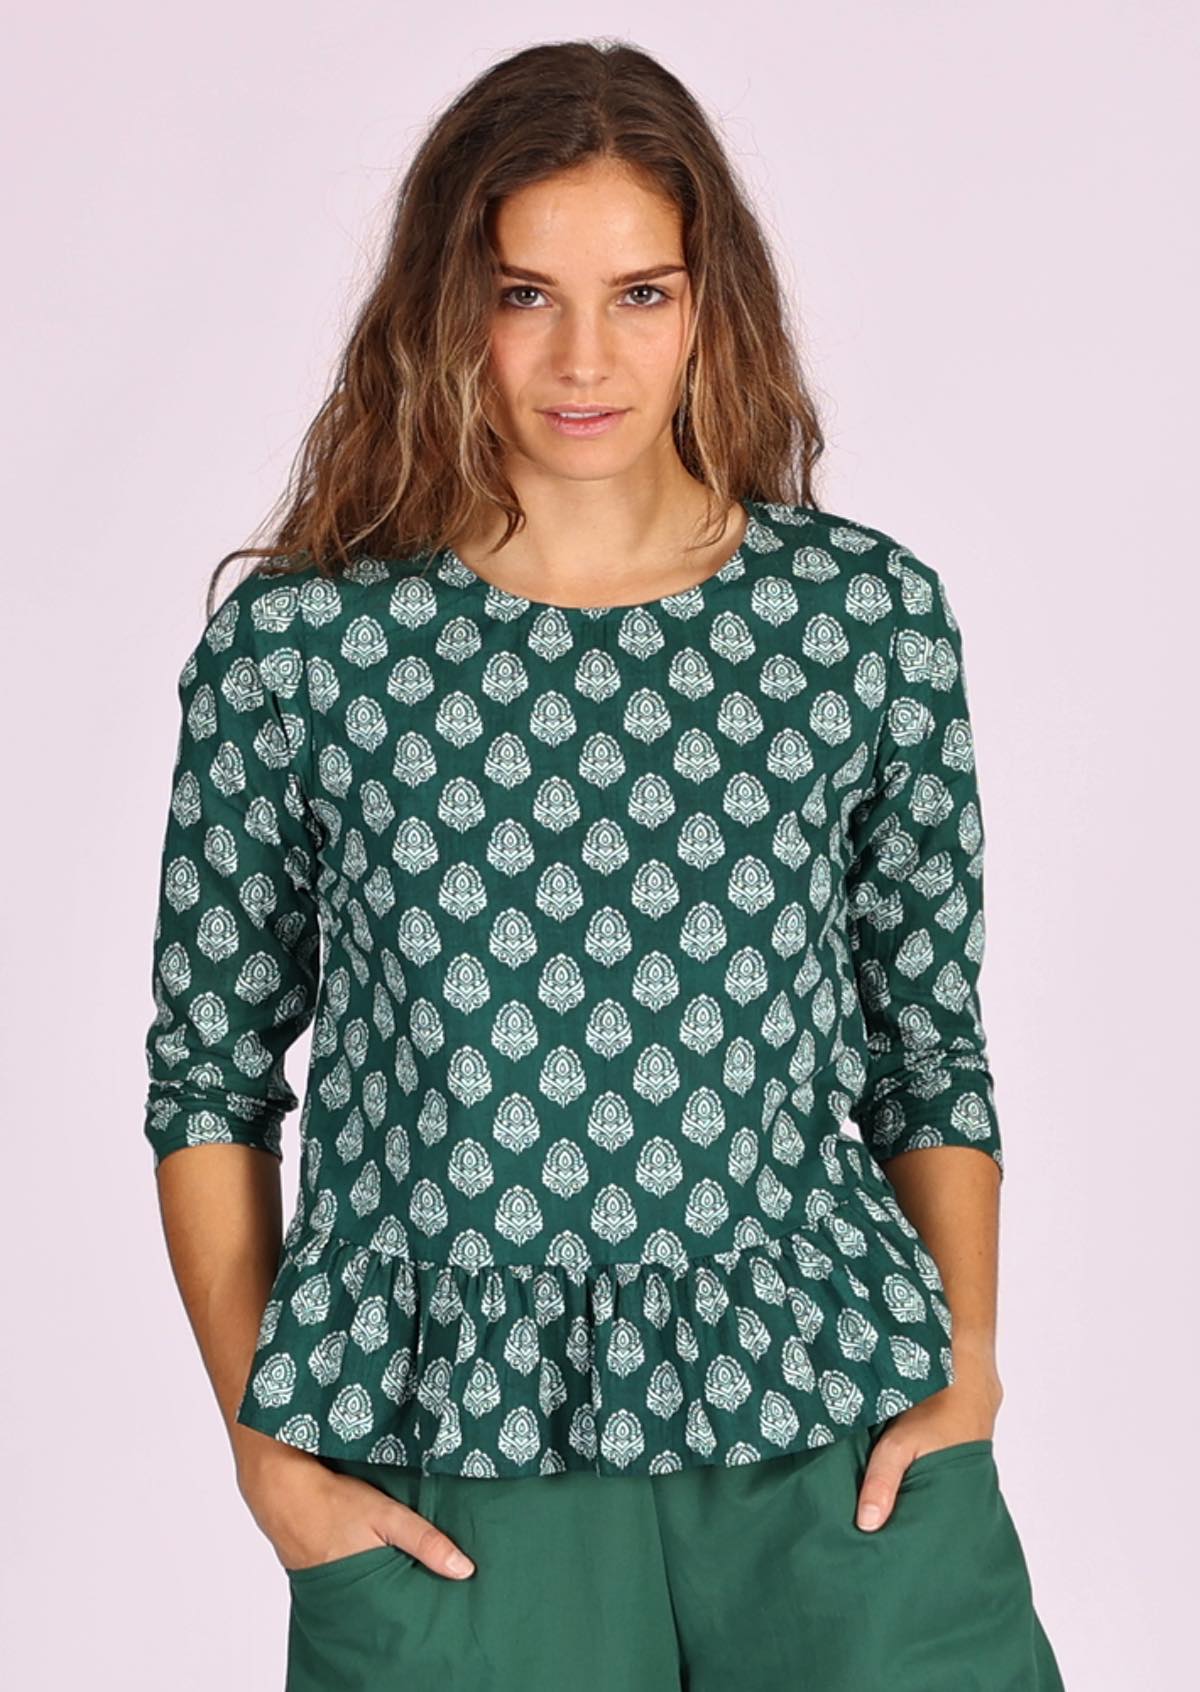 Simple sophistication in this white pendant print on dark green base peplum cotton top